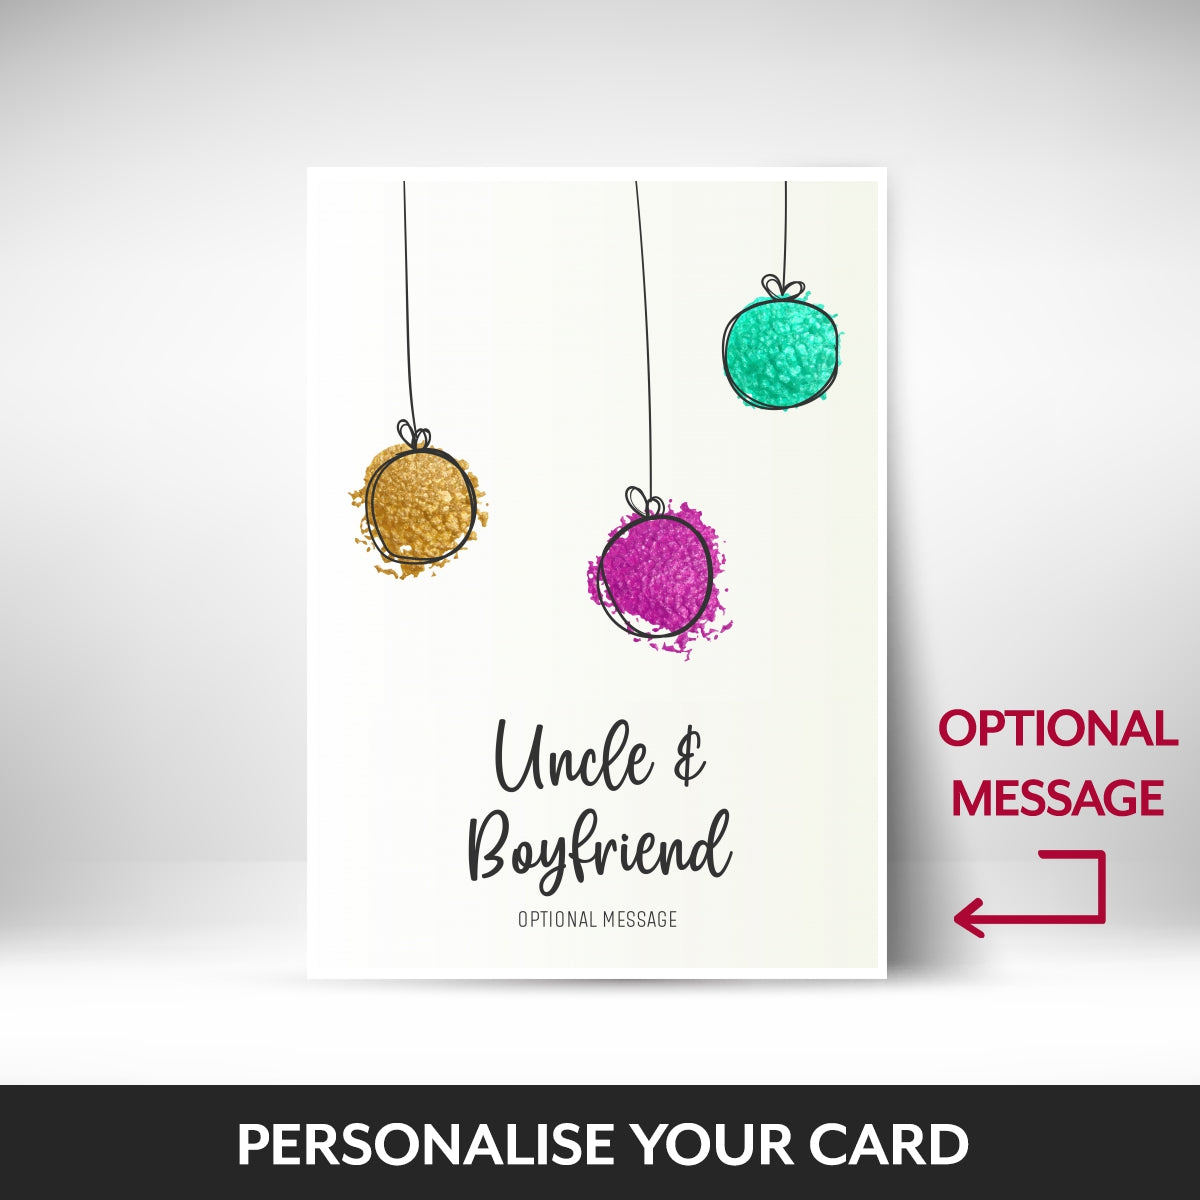 What can be personalised on this Uncle & Boyfriend christmas cards